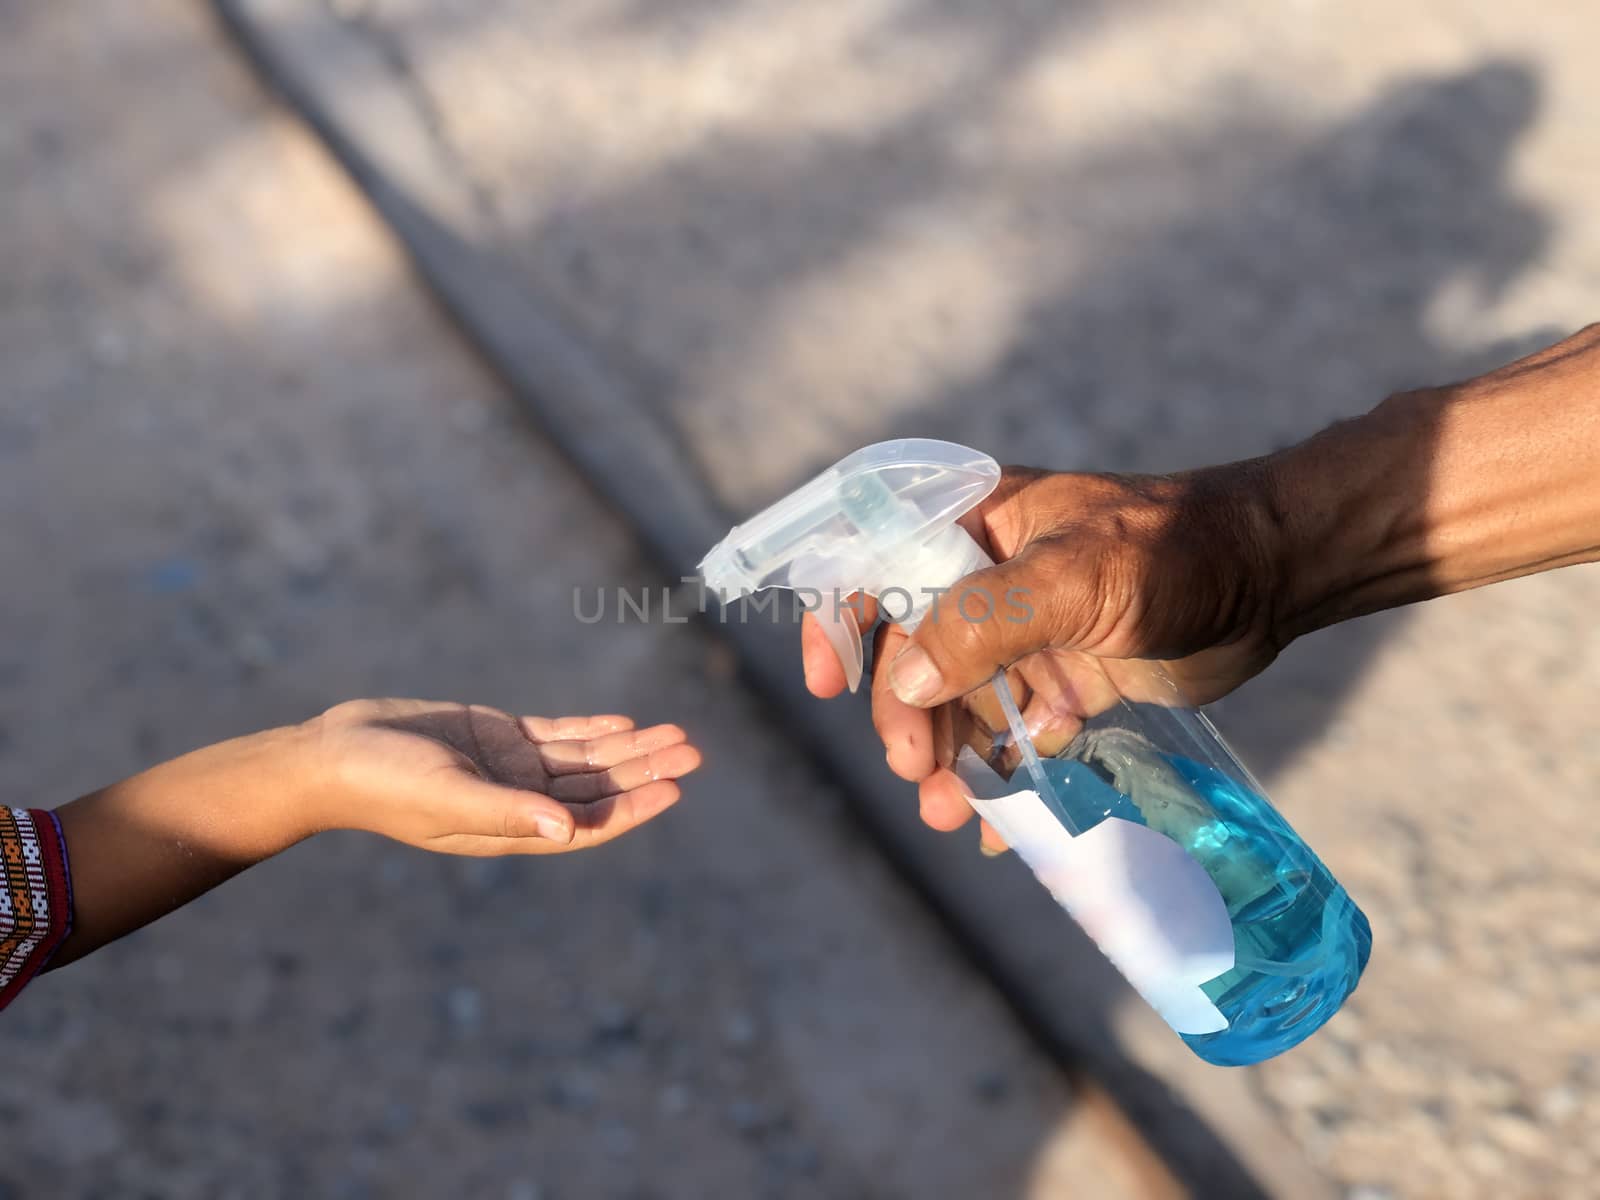 Public health officials inject alcohol spray into the hands of students to kill and prevent the spread of the covid-19 virus. In front of the school.